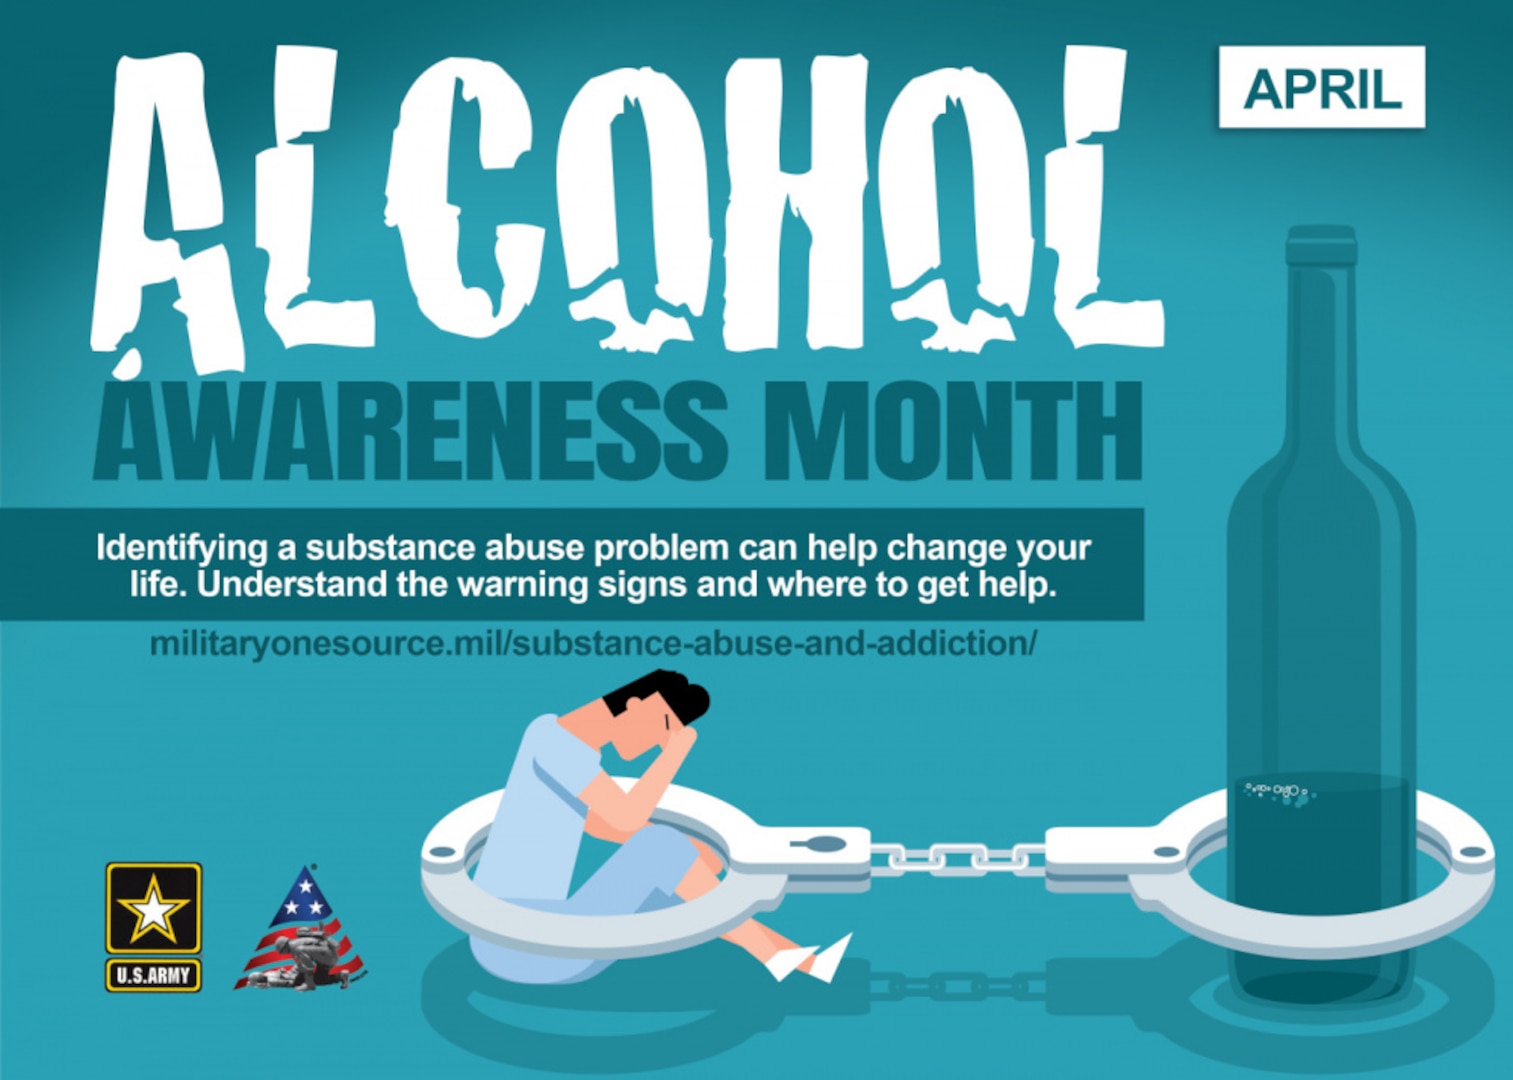 Warning signs that a loved one might have issues with alcohol are decreased energy, denial of substance abuse, irritability, anxiety, mood swings, poor work performance and many more. Learn how to help.